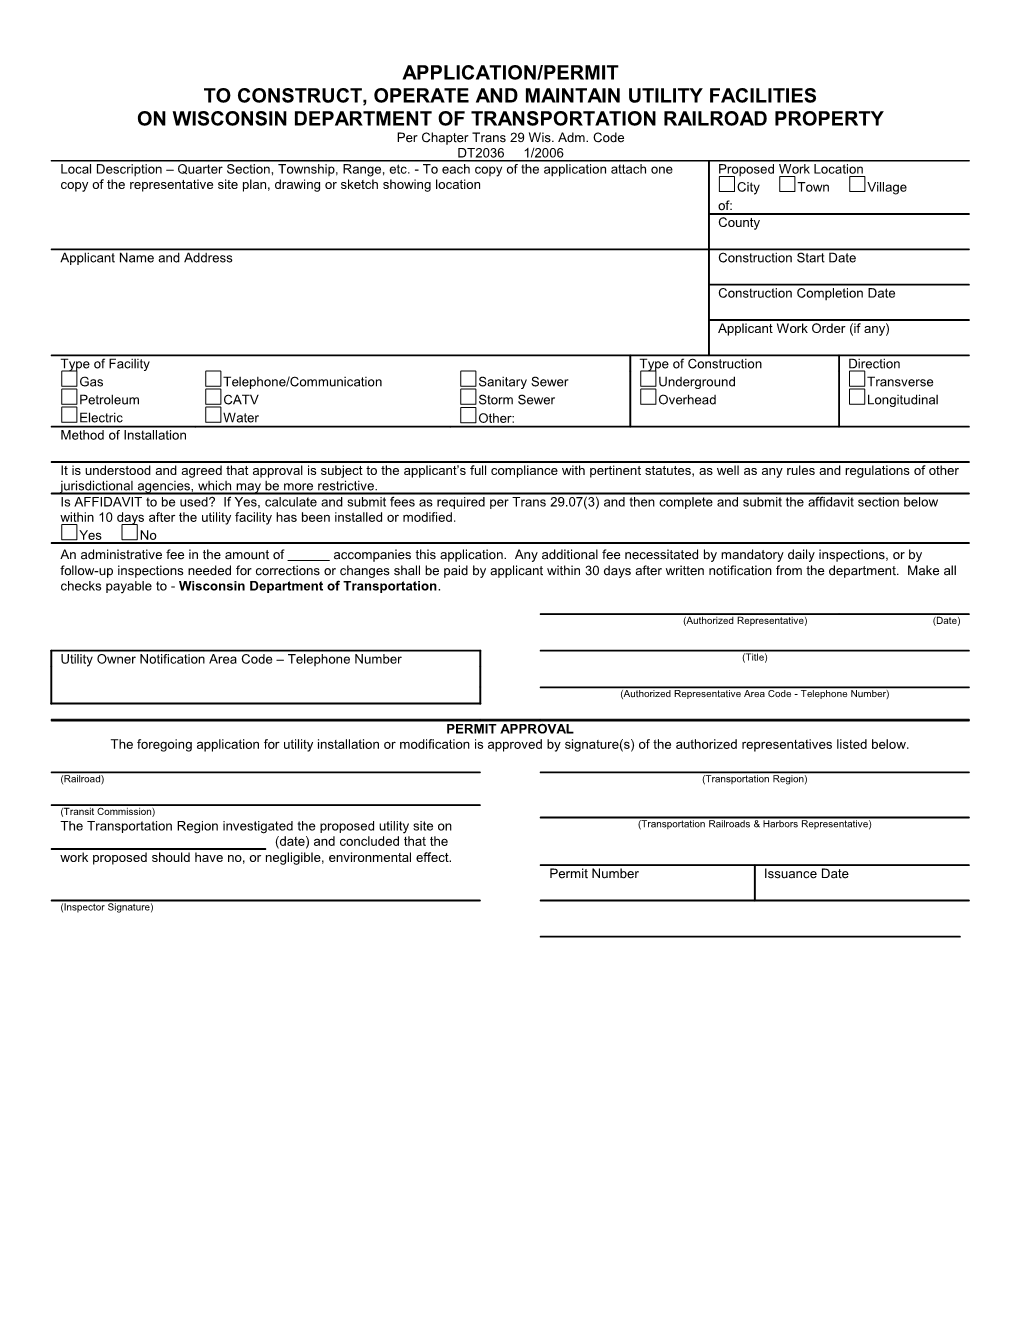 DT2036 Application/Permit to Construct, Operate and Maintain Utility Facilities on WDOT